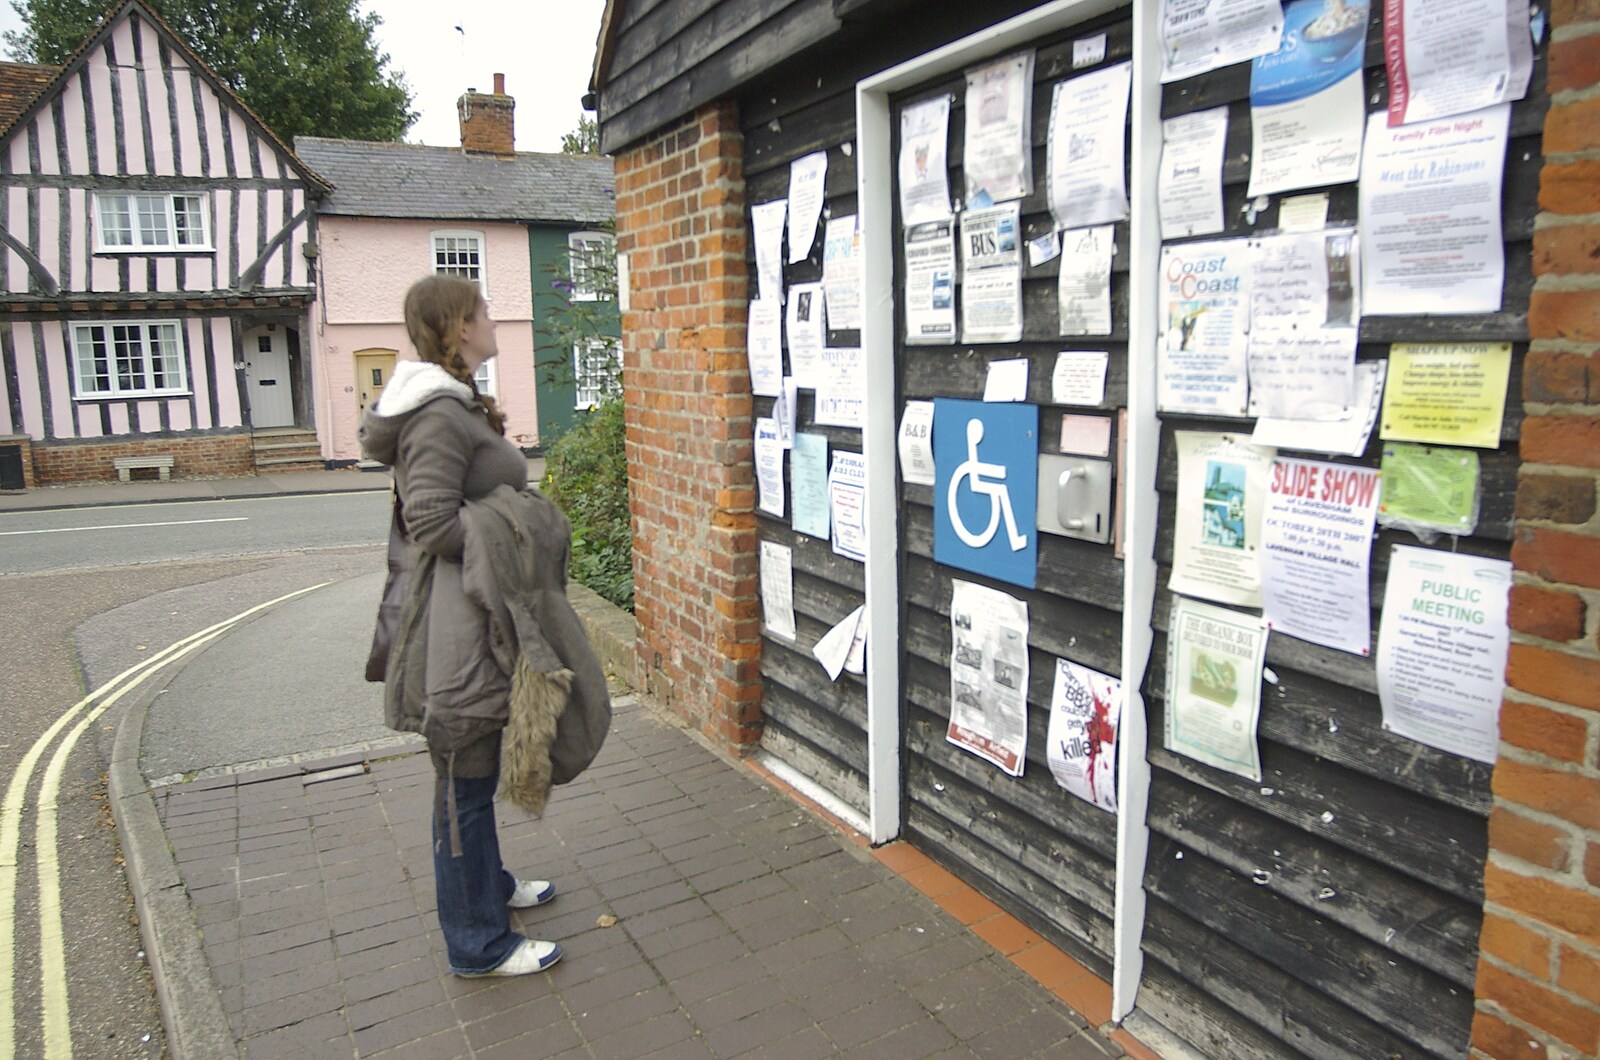 A Road Trip in an MX-5, and Athlete at the UEA, Lavenham and Norwich - 14th October 2007: Isobel looks at the town noticeboard